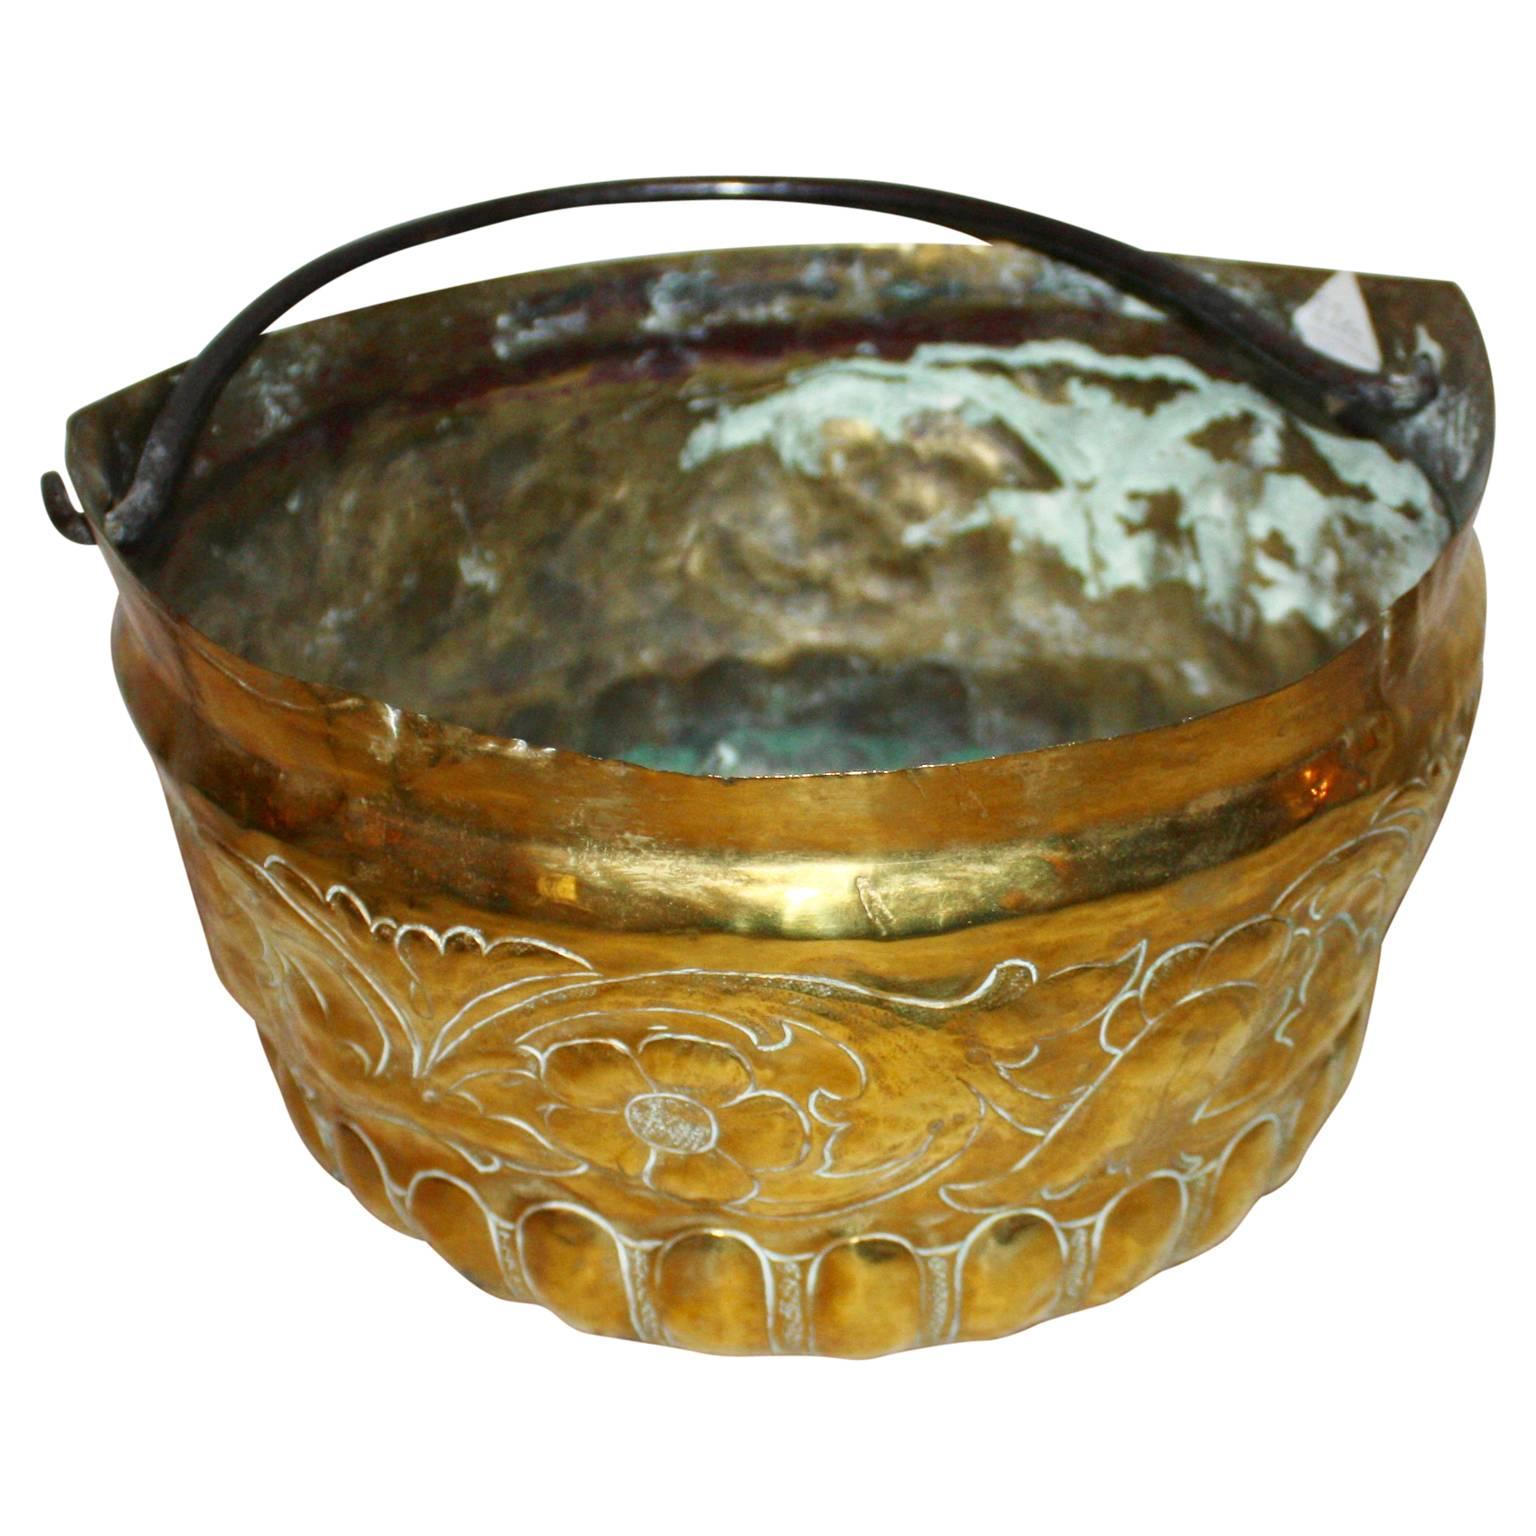 Period brass cooking pot with decorations on the side and bottom. Pot has a iron handle to hook pot over the fireplace.